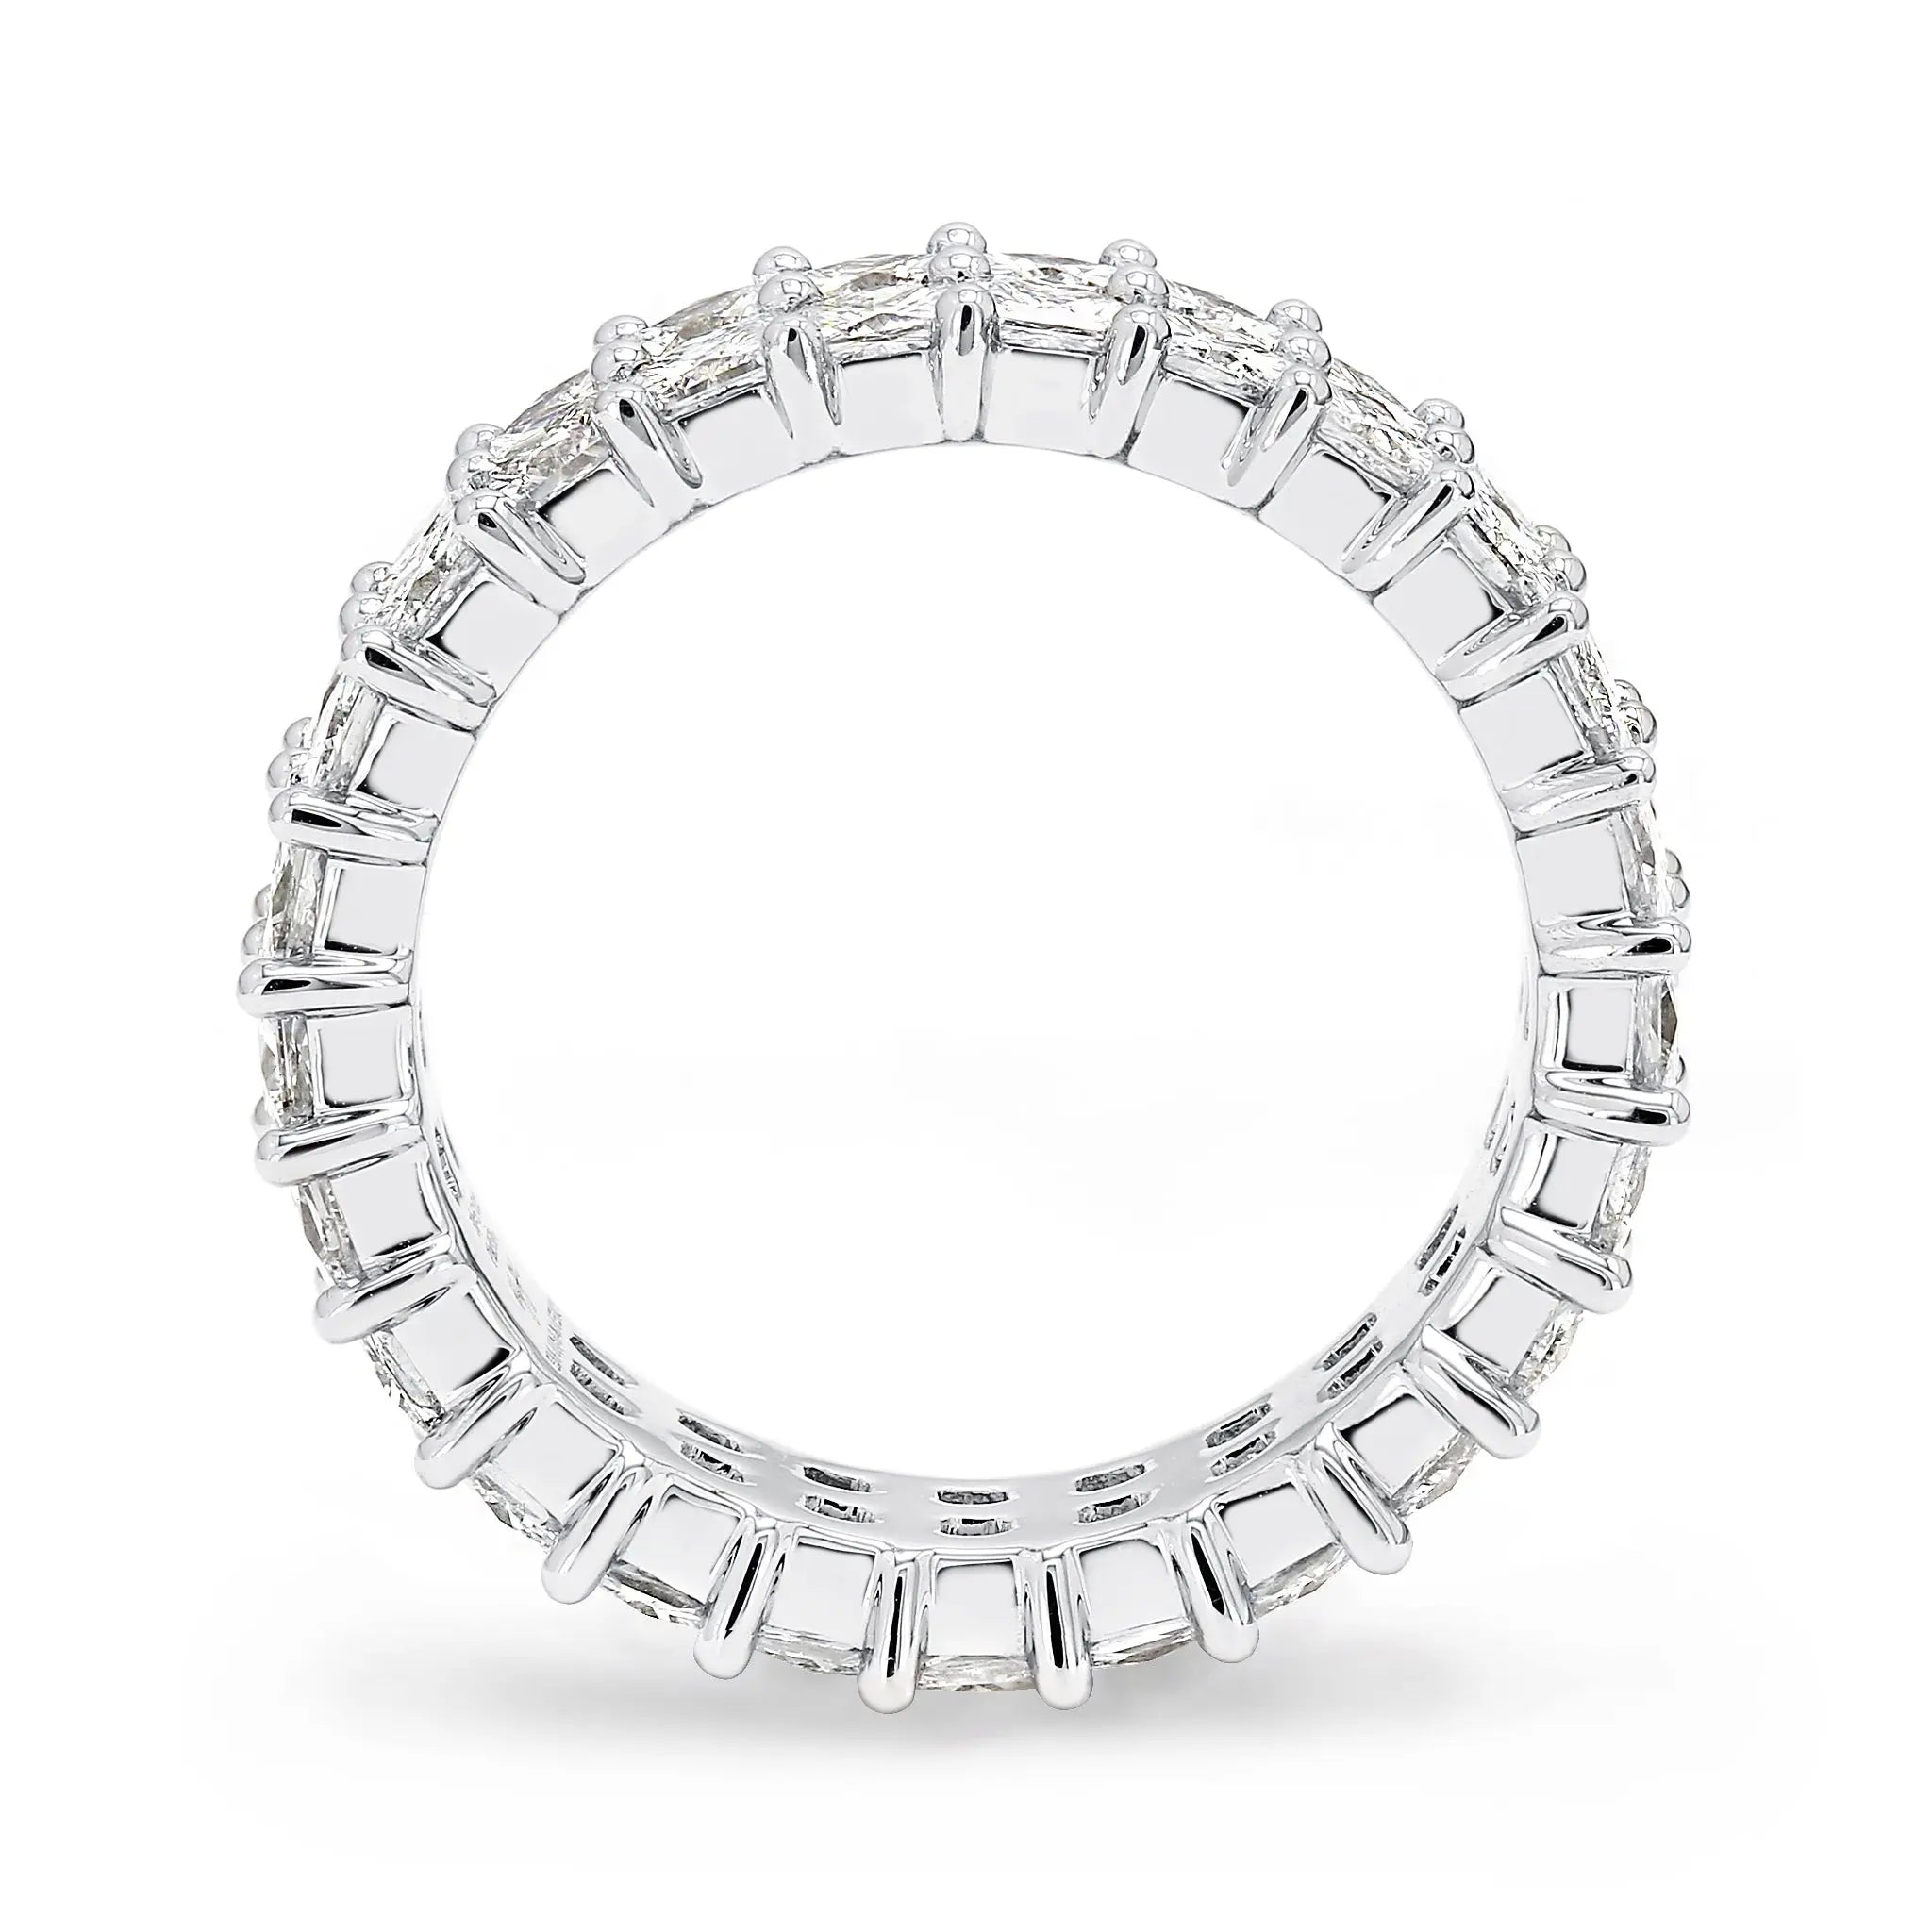 Shimansky - My Girl 2 Row Full Eternity Diamond Ring 4.00ct Crafted in 18K White Gold